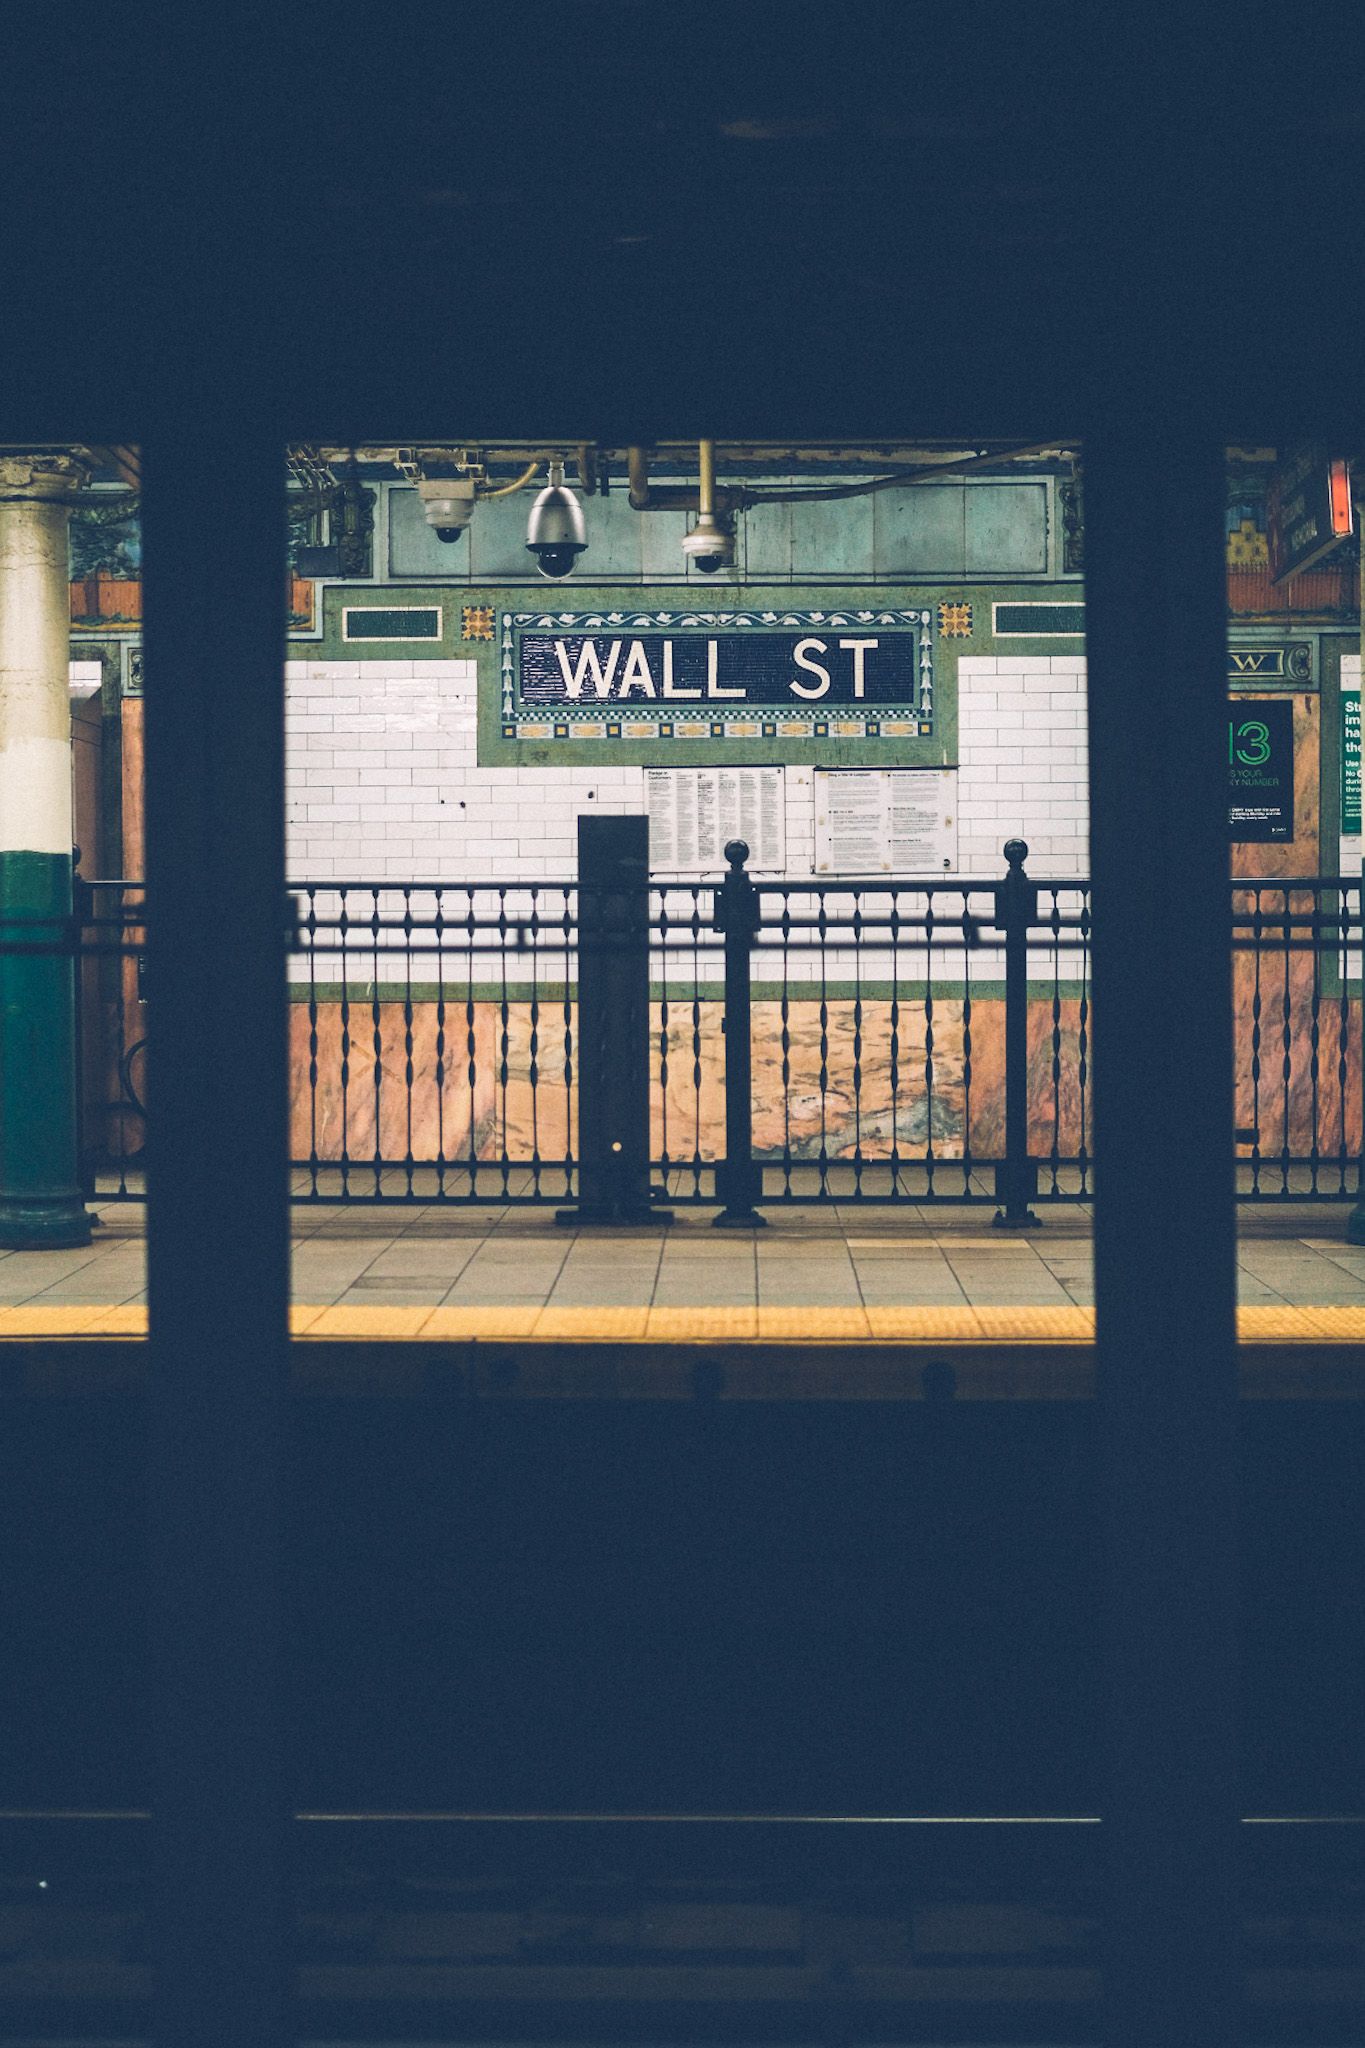 The view from a subway station across the train tracks, staring at a wall tiled with the words Wall St.